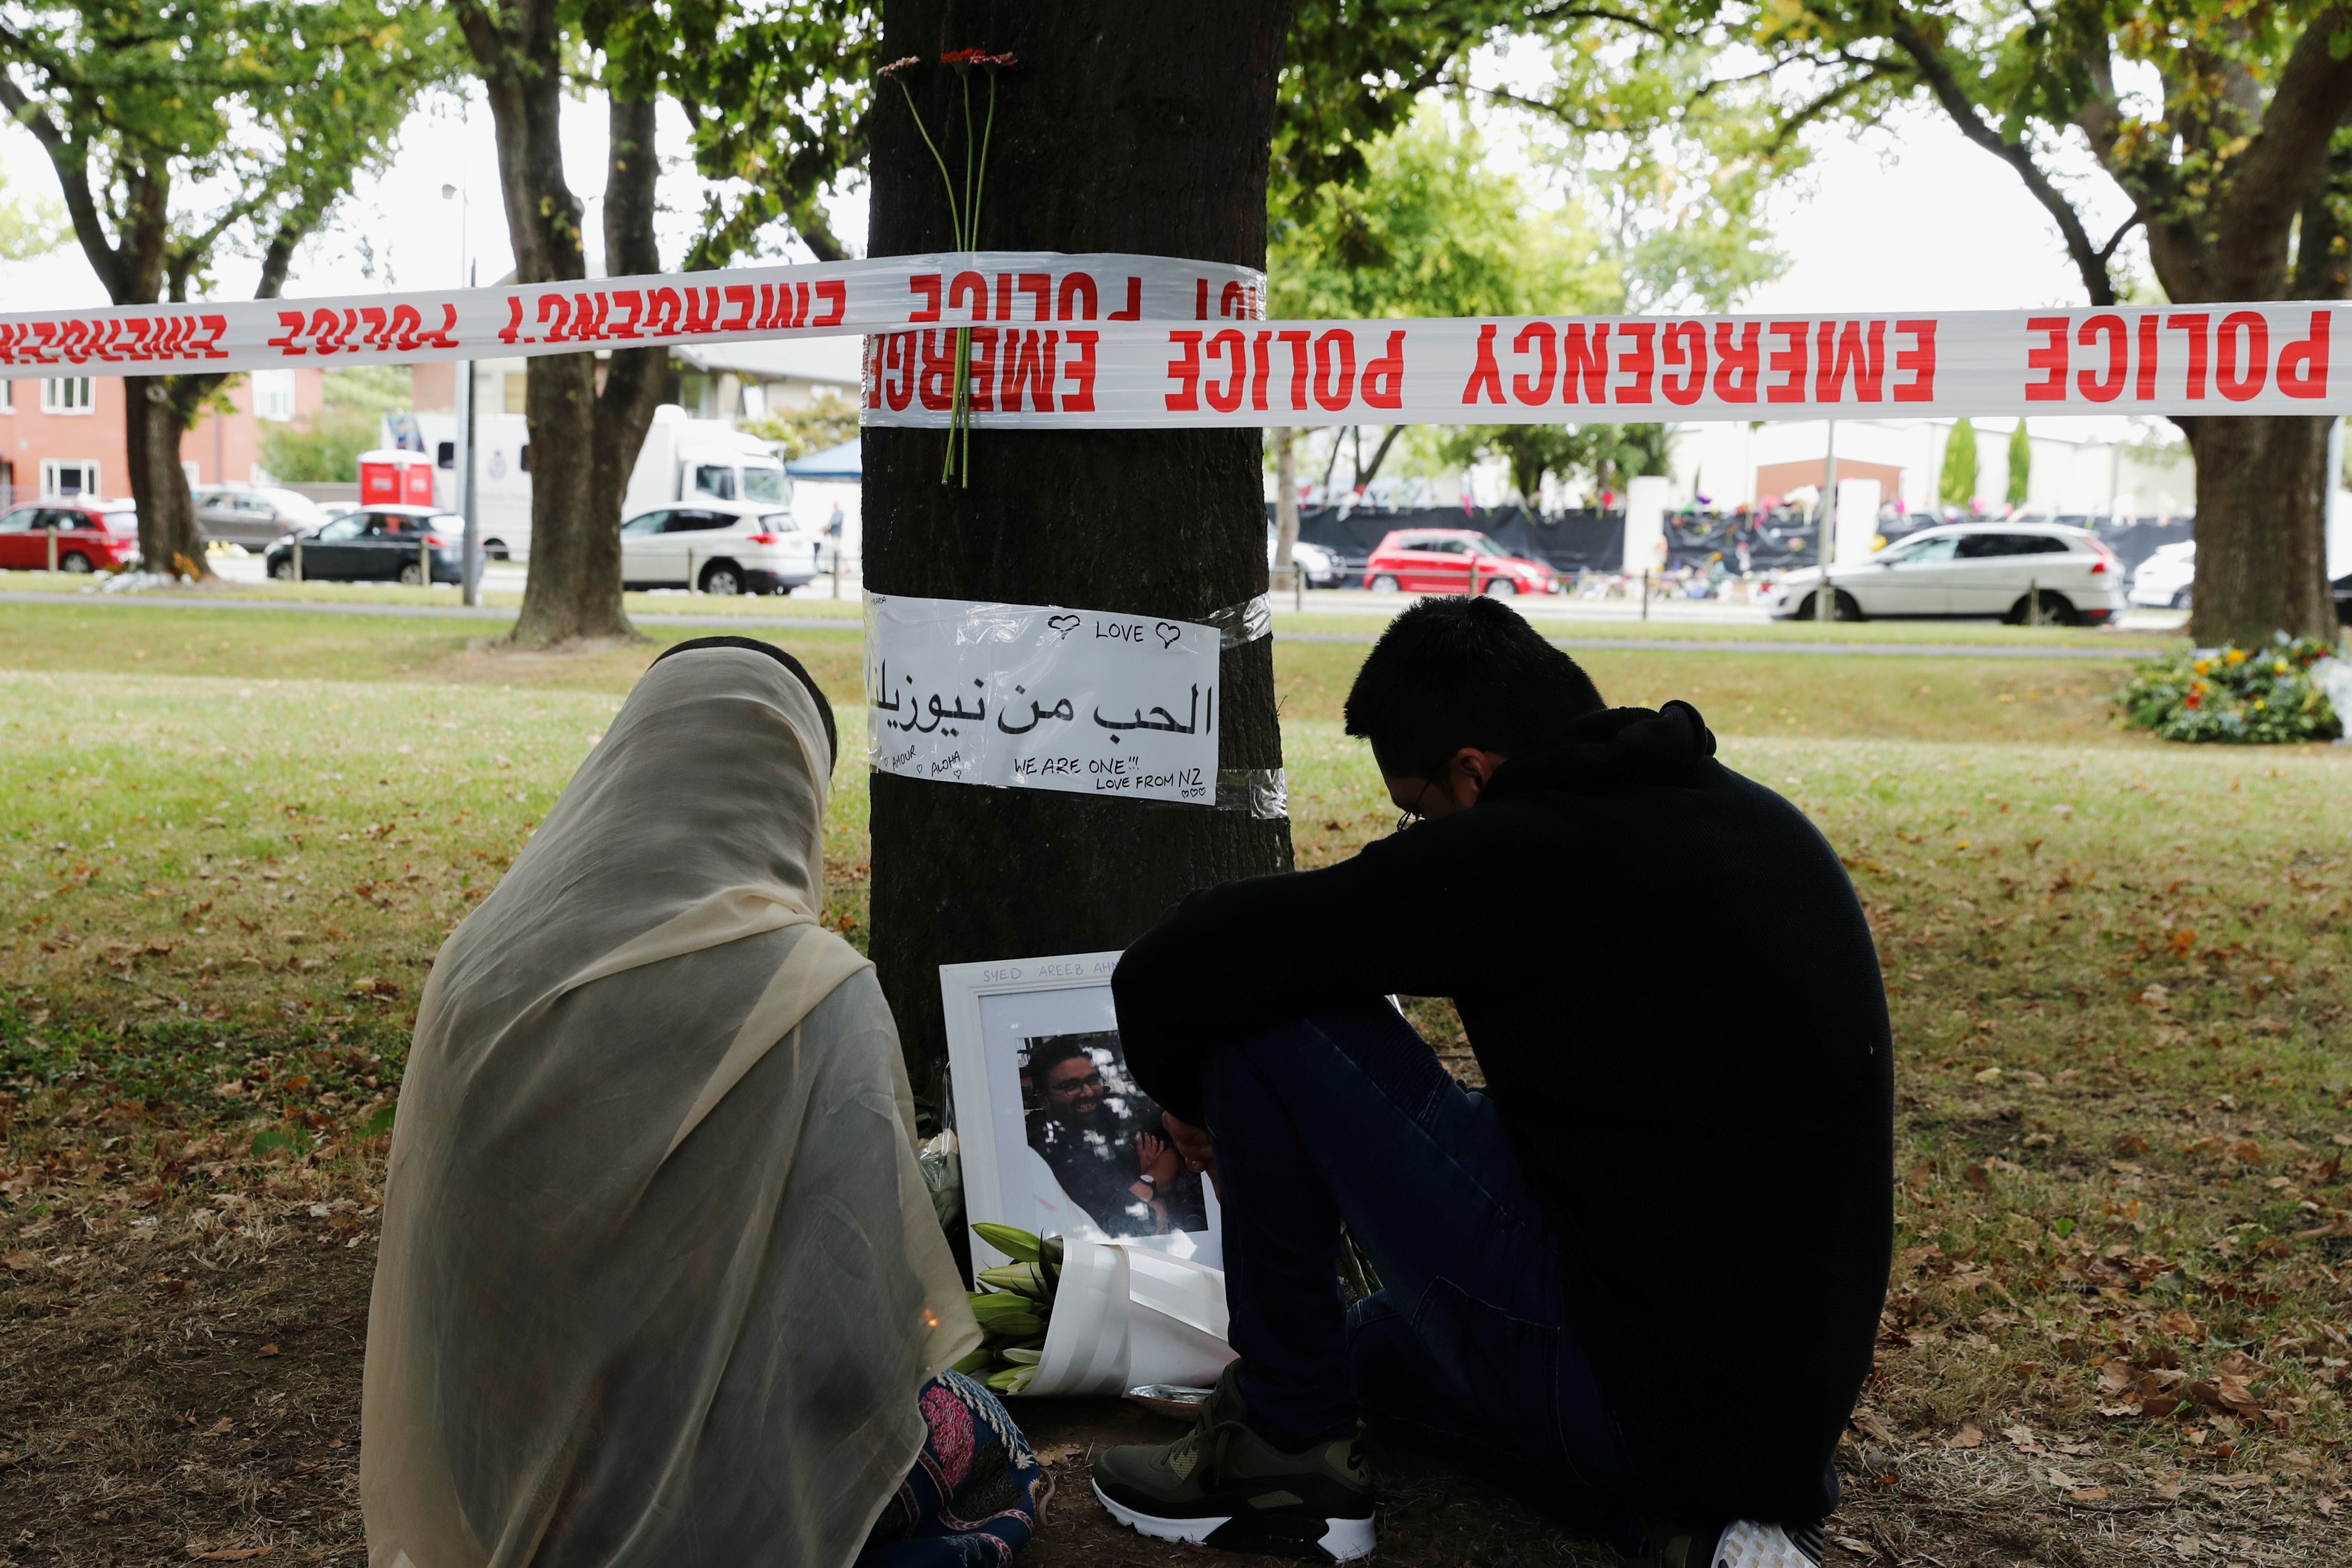 People visit at a memorial site for victims of Friday's shooting, in front of the Masjid Al Noor mosque in Christchurch, New Zealand on 18 March (REUTERS)